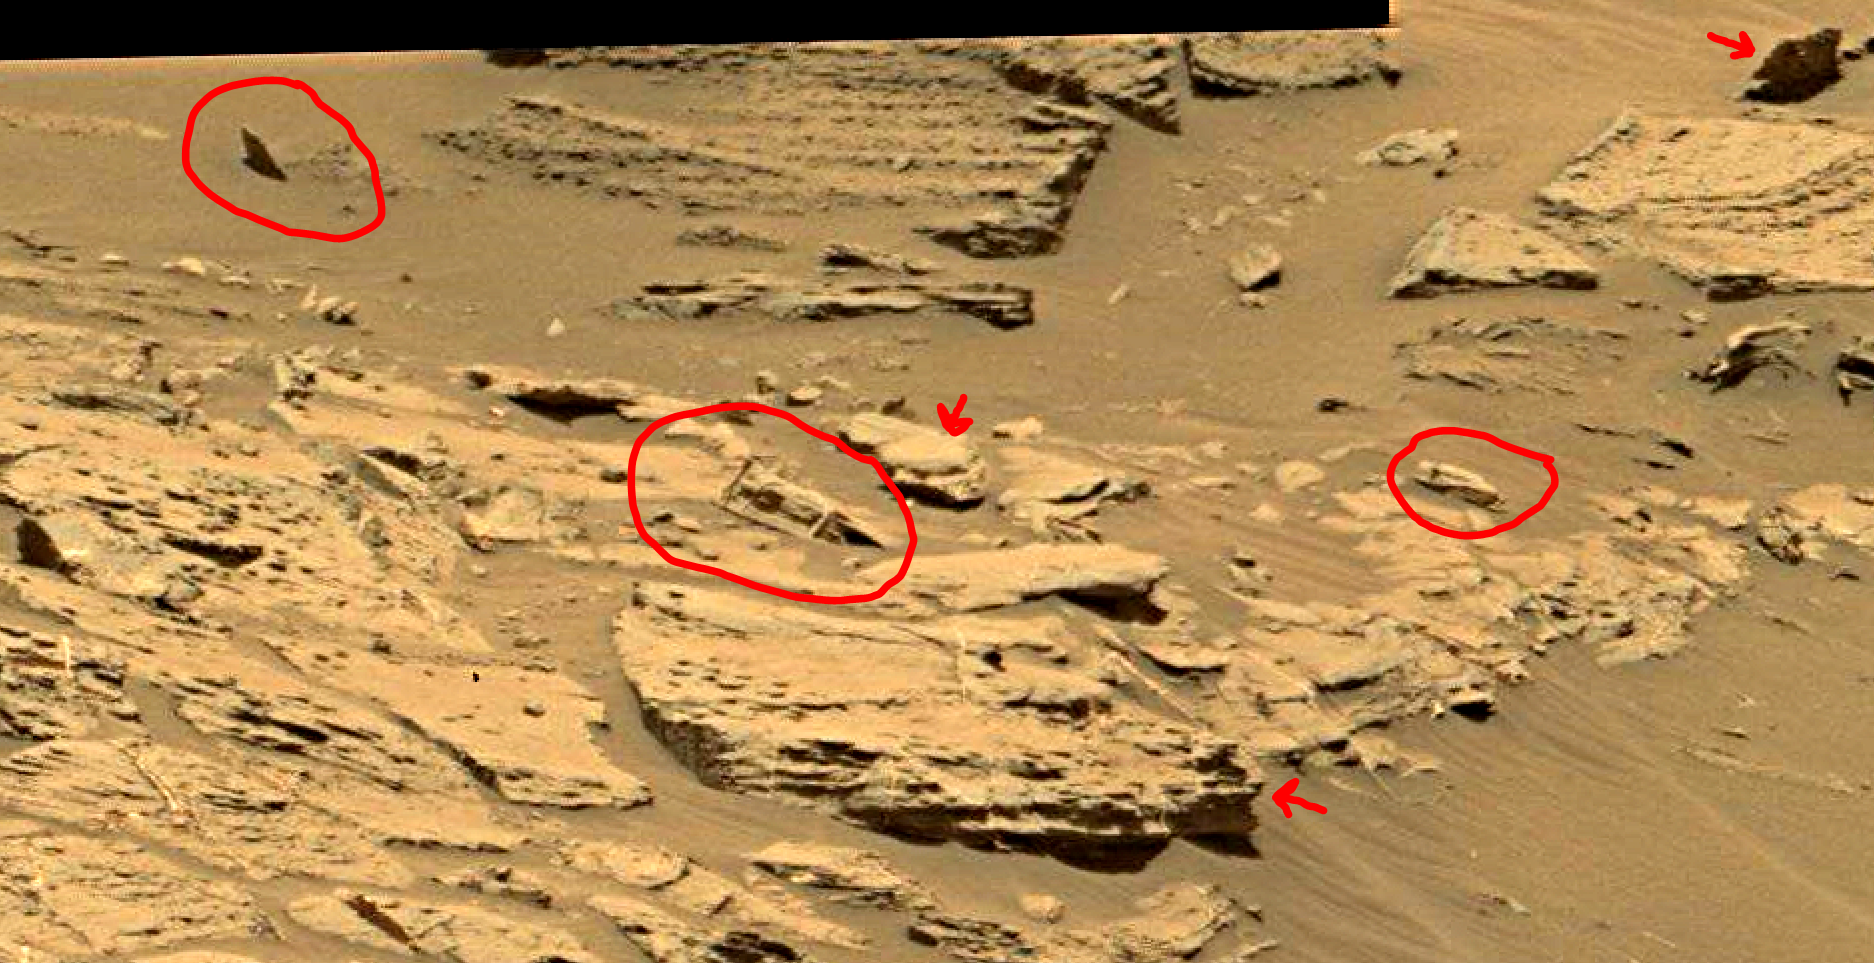 mars sol 1353 anomaly-artifacts 9a was life on mars